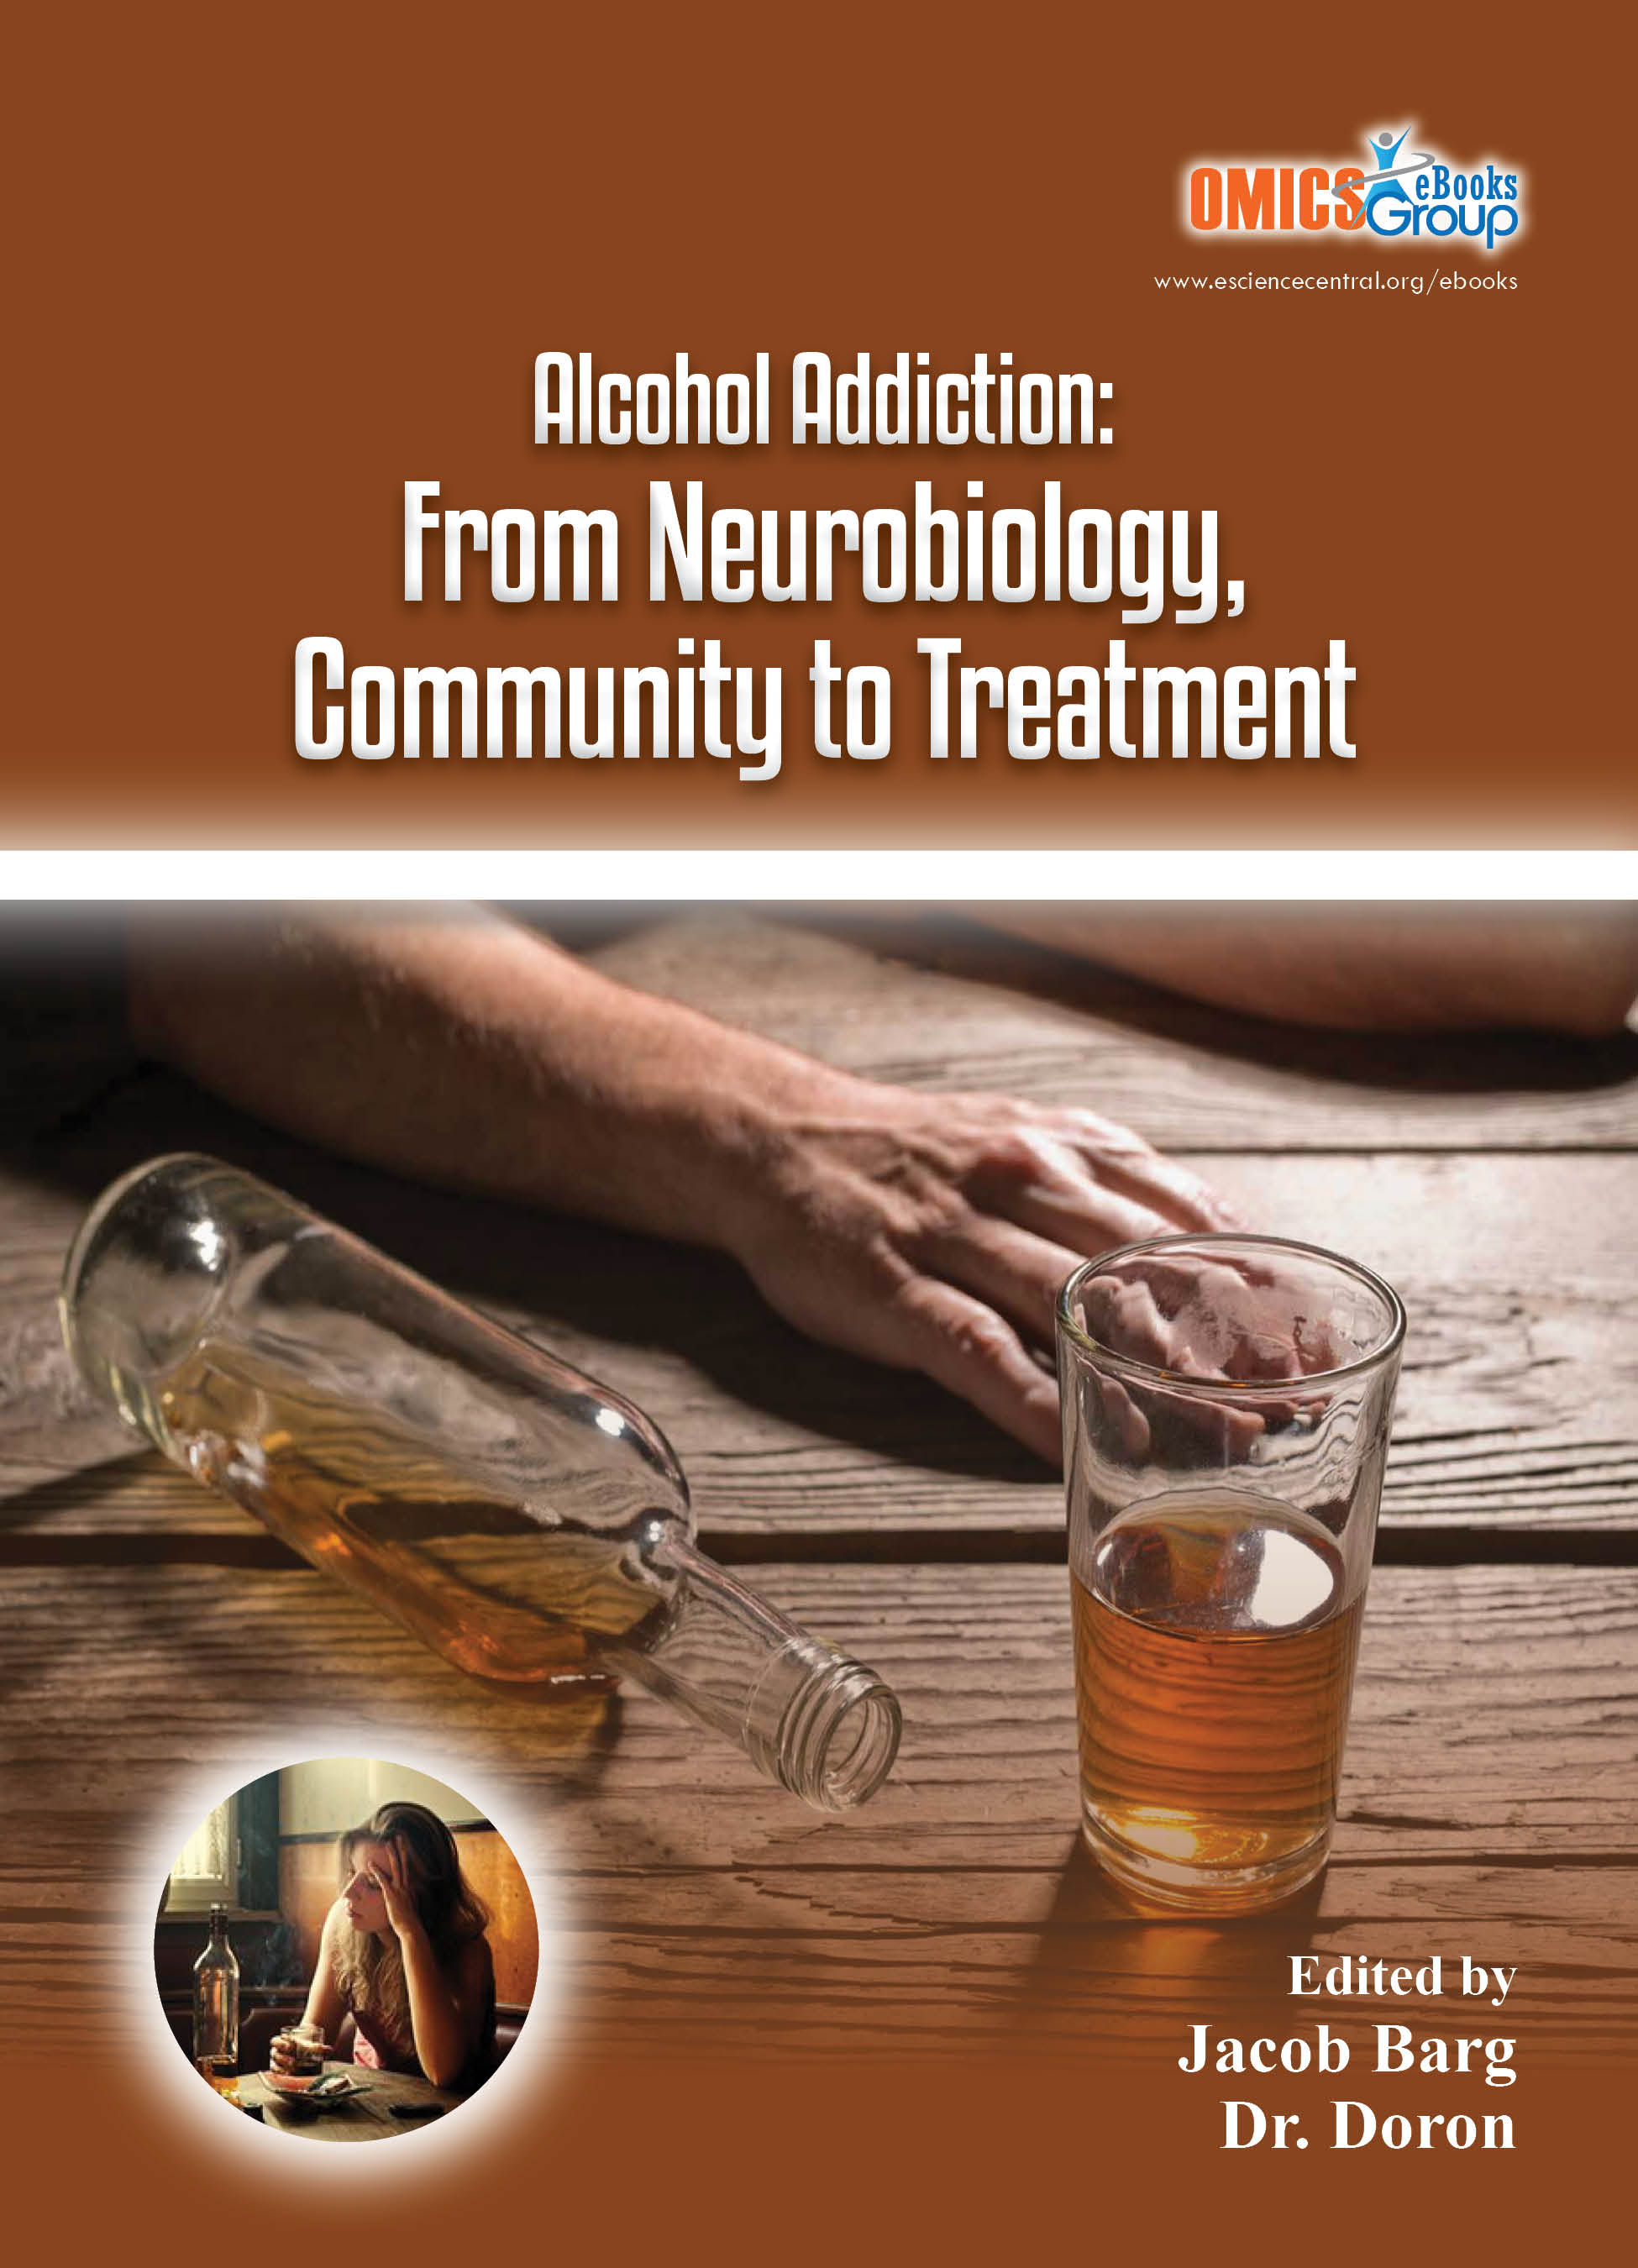 Alcohol Addiction: From Neurobiology, Community to Treatment